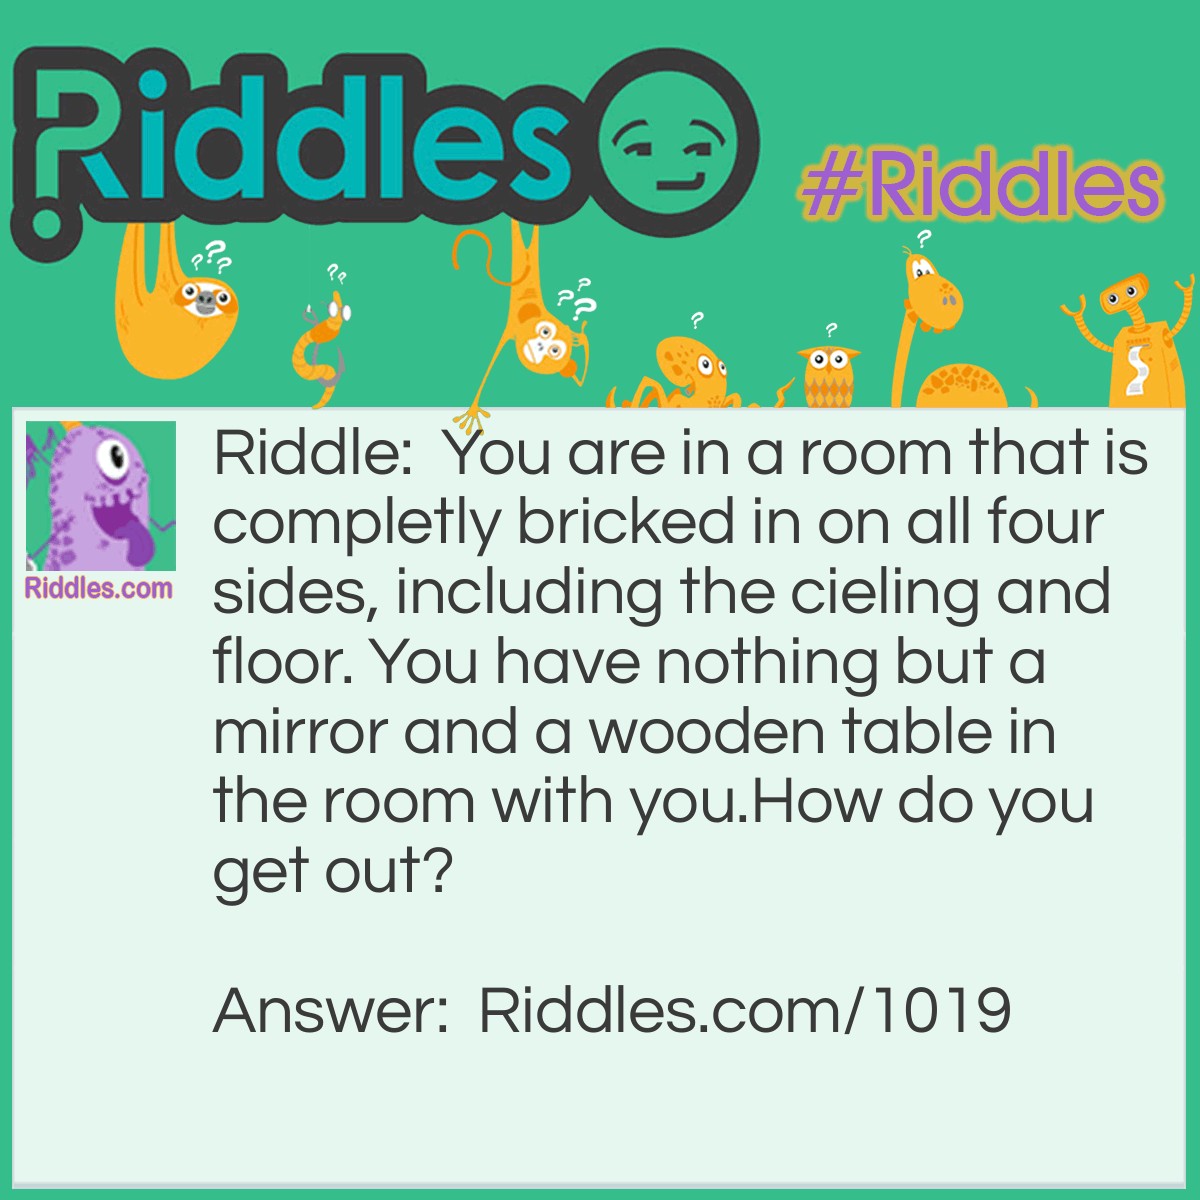 Riddle: You are in a room that is completely bricked in on all four sides, including the cieling and floor. You have nothing but a mirror and a wooden table in the room with you.
How do you get out? Answer: You look in the mirror you see what you saw, you take the saw and you cut the table in half, two halfs make a whole, and you climb out the hole. 